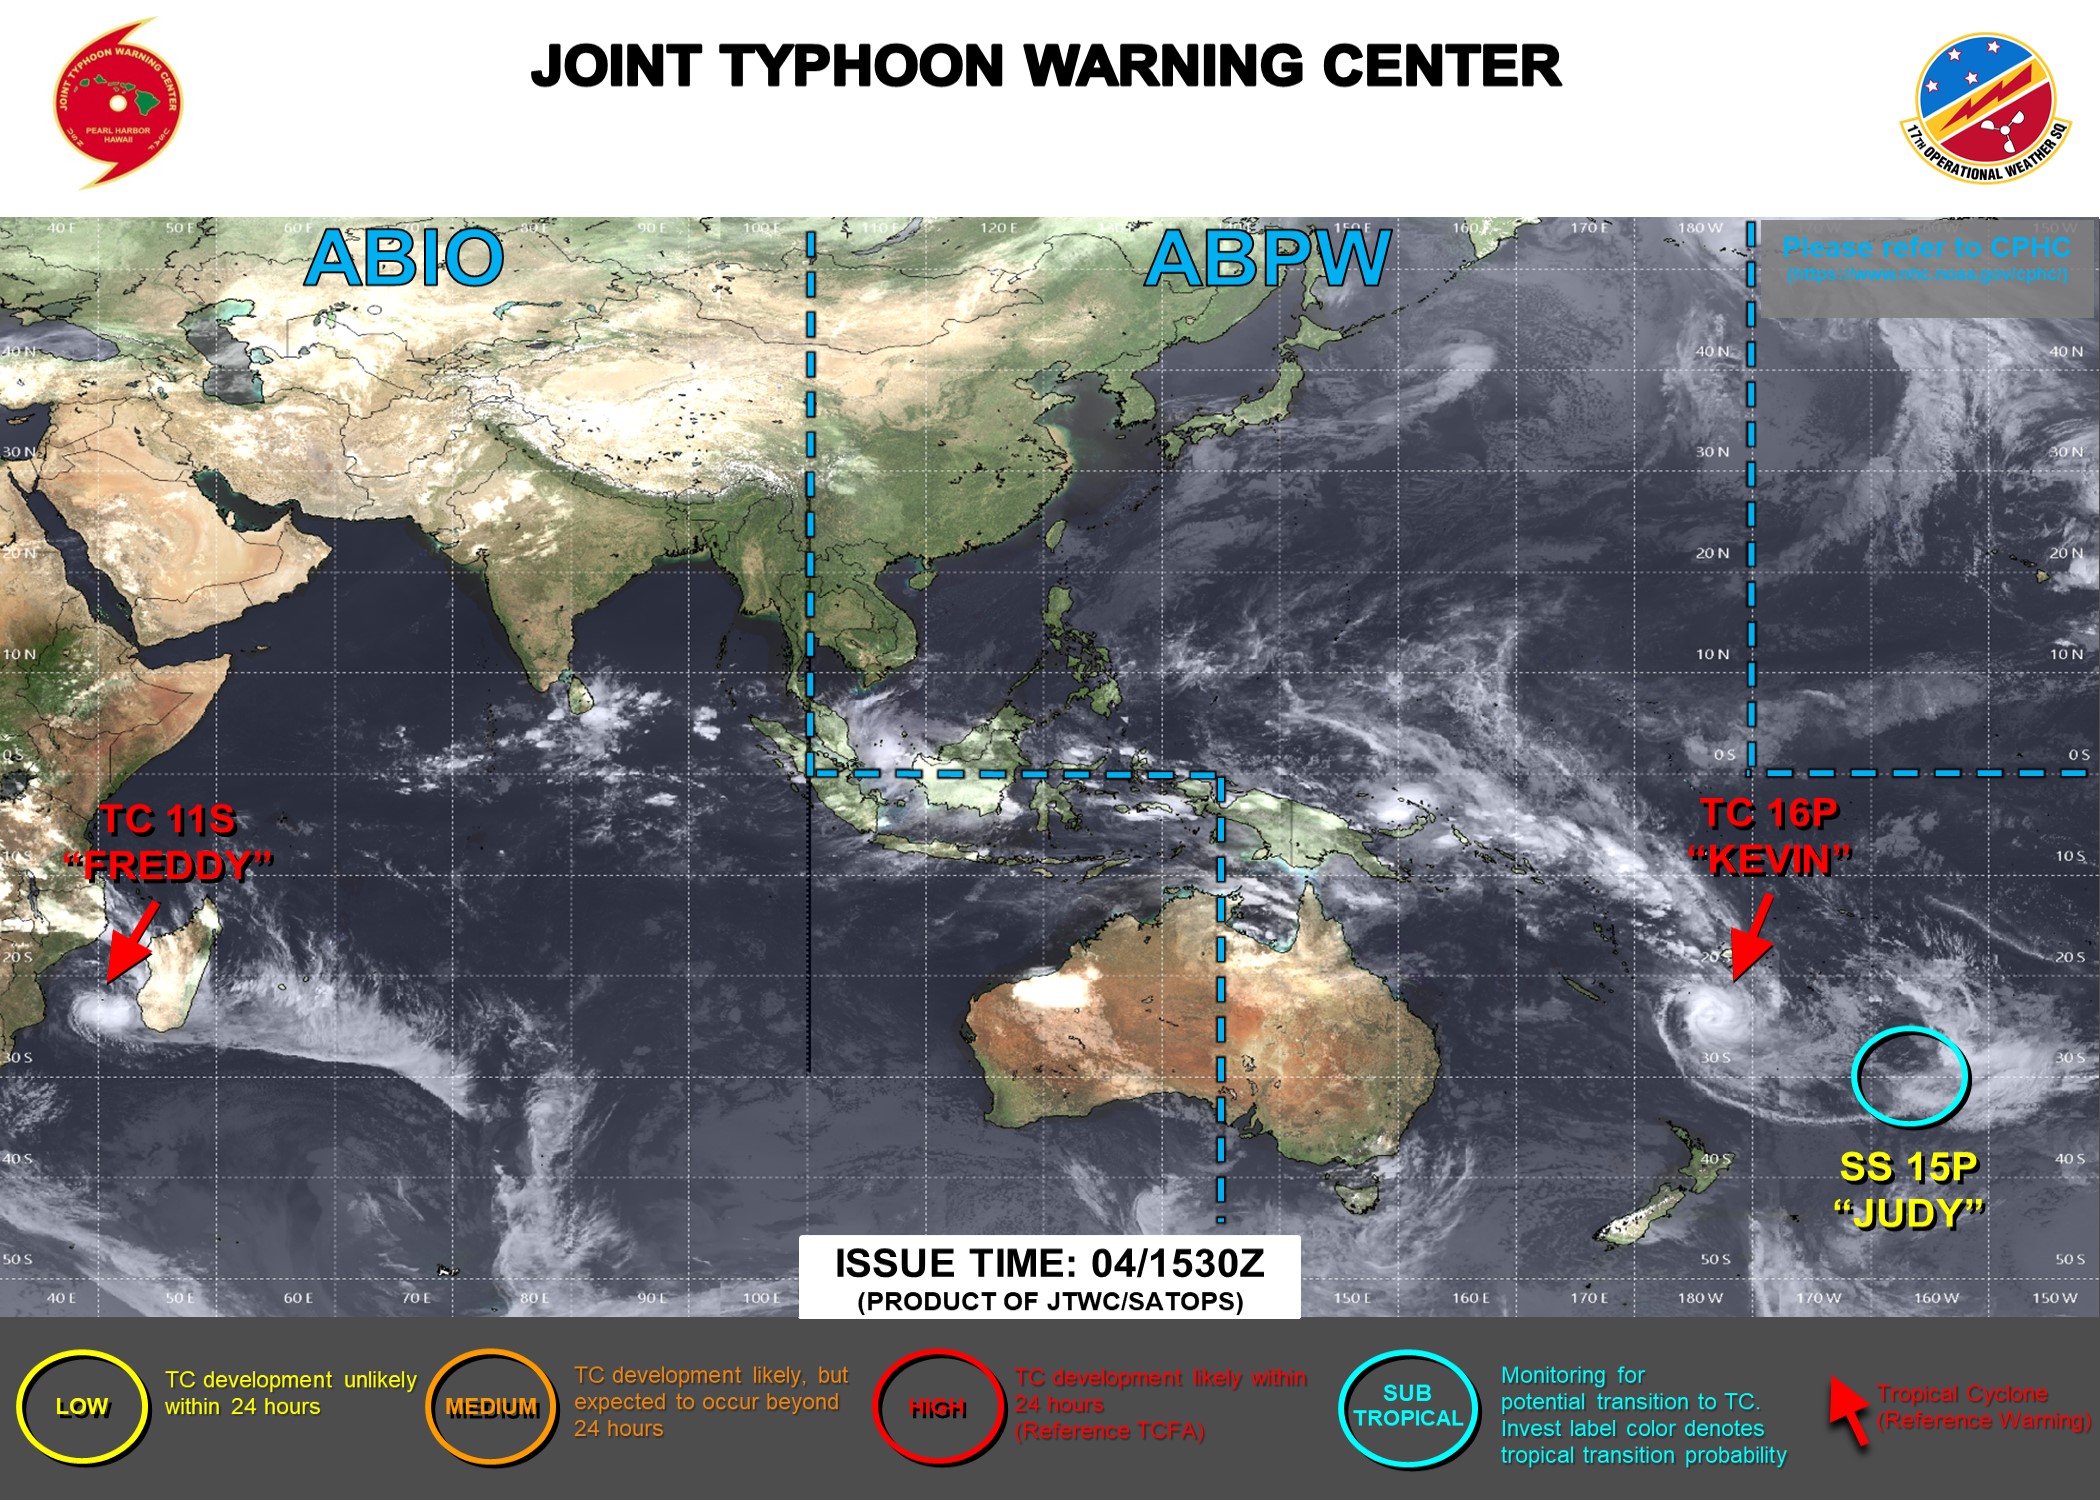 JTWC IS ISSUING 6HOURLY WARNINGS AND 3HOURLY SATELLITE BULLETINS ON TC 16P(KEVIN). 12HOURLY WARNINGS AND 3HOURLY SATELLITE BULLETINS ARE ISSUED ON TC 11S(FREDDY). 3HOURLY SATELLITE BULLETINS ARE ISSUED ON SUBTROPICAL STORM 15P(JUDY).